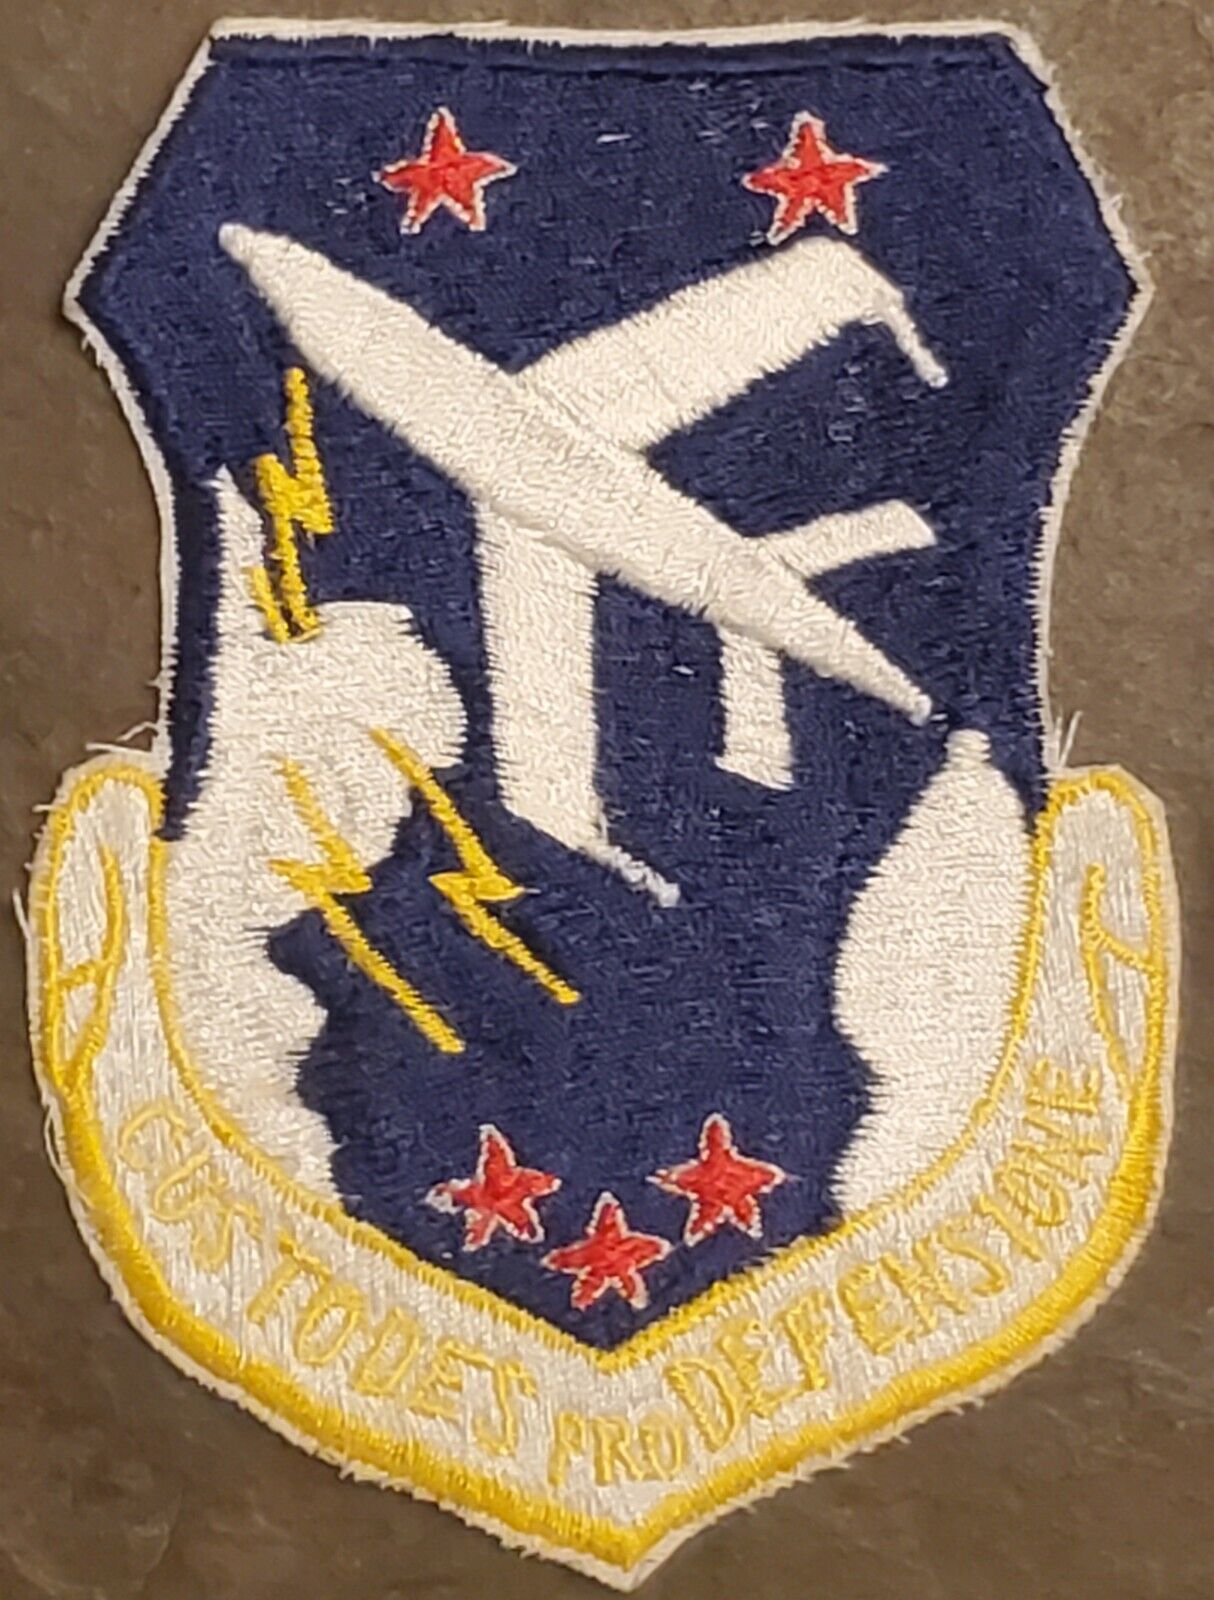 USAF AIR FORCE 113th Tactical Fighter Wing 'Capital Guardians) Patch OLDER RARE